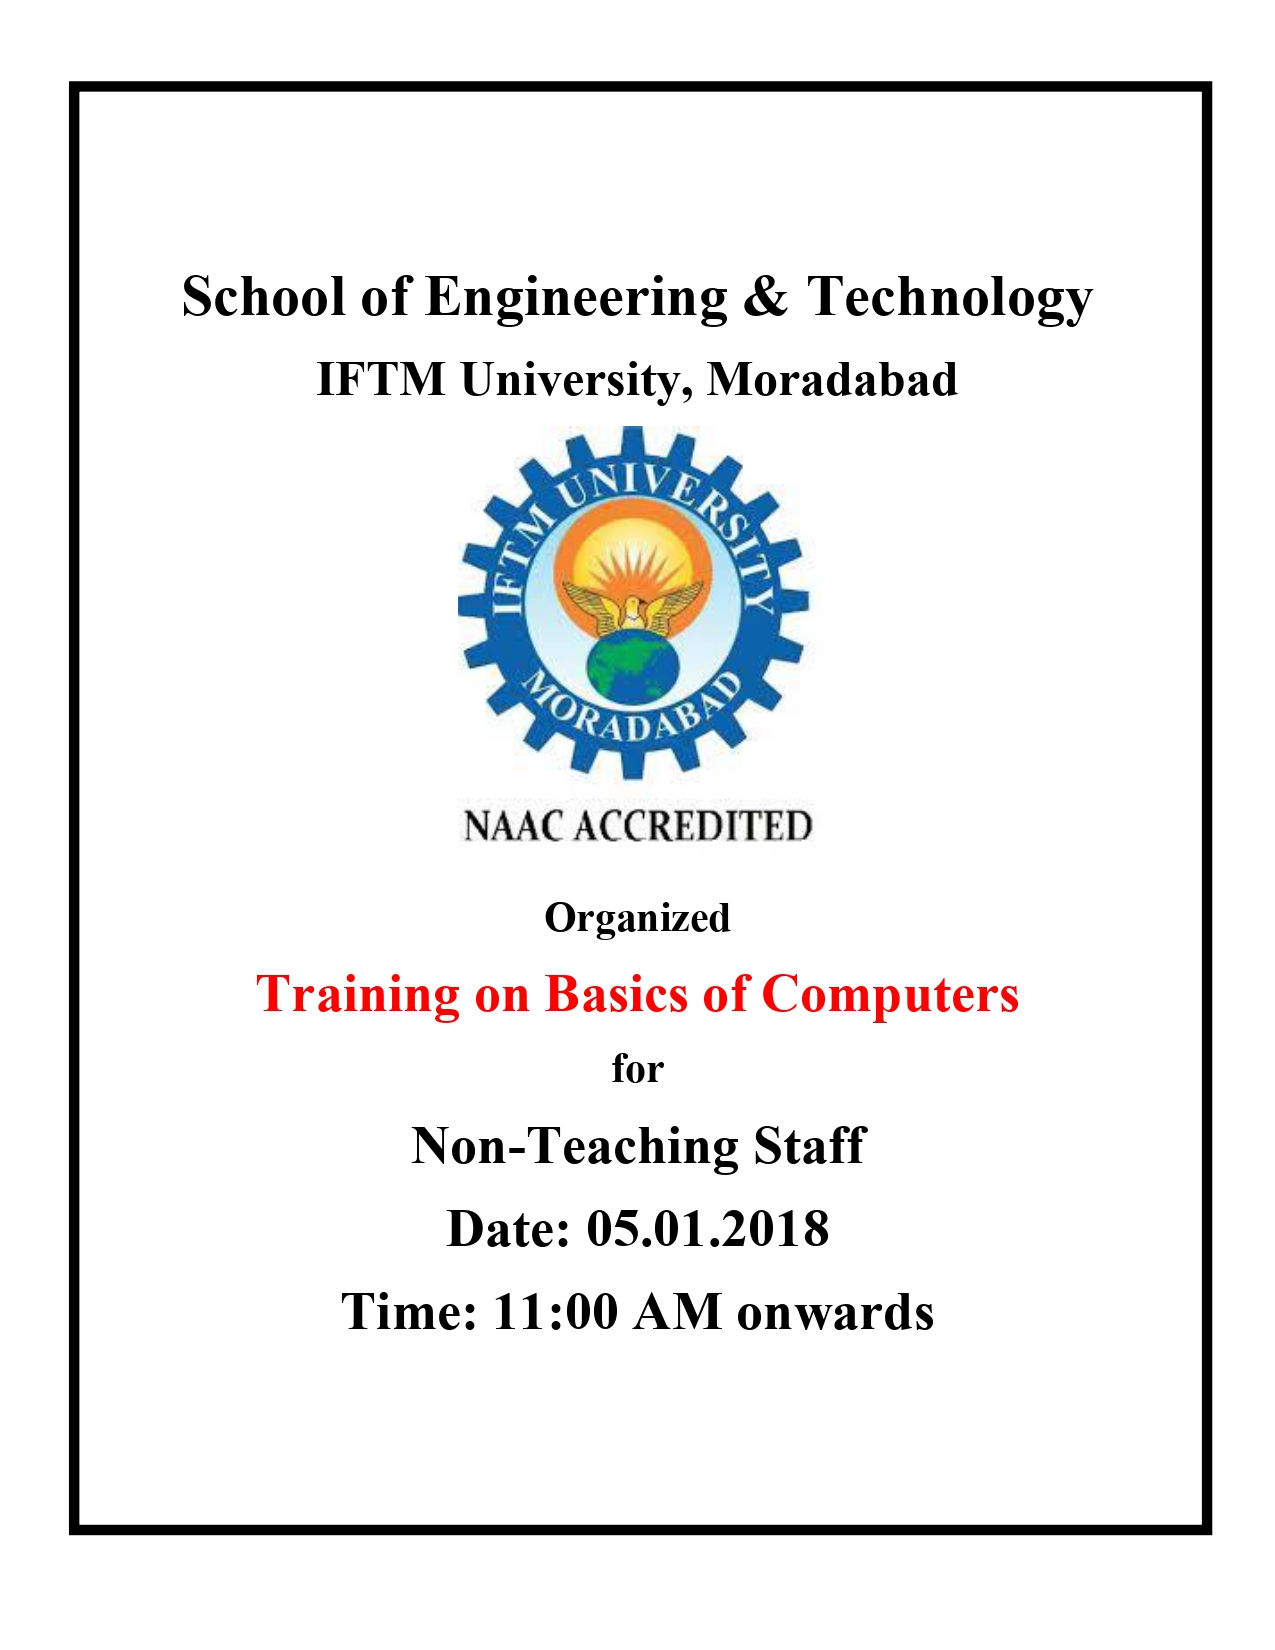 A Training Programme on Basics of Computers